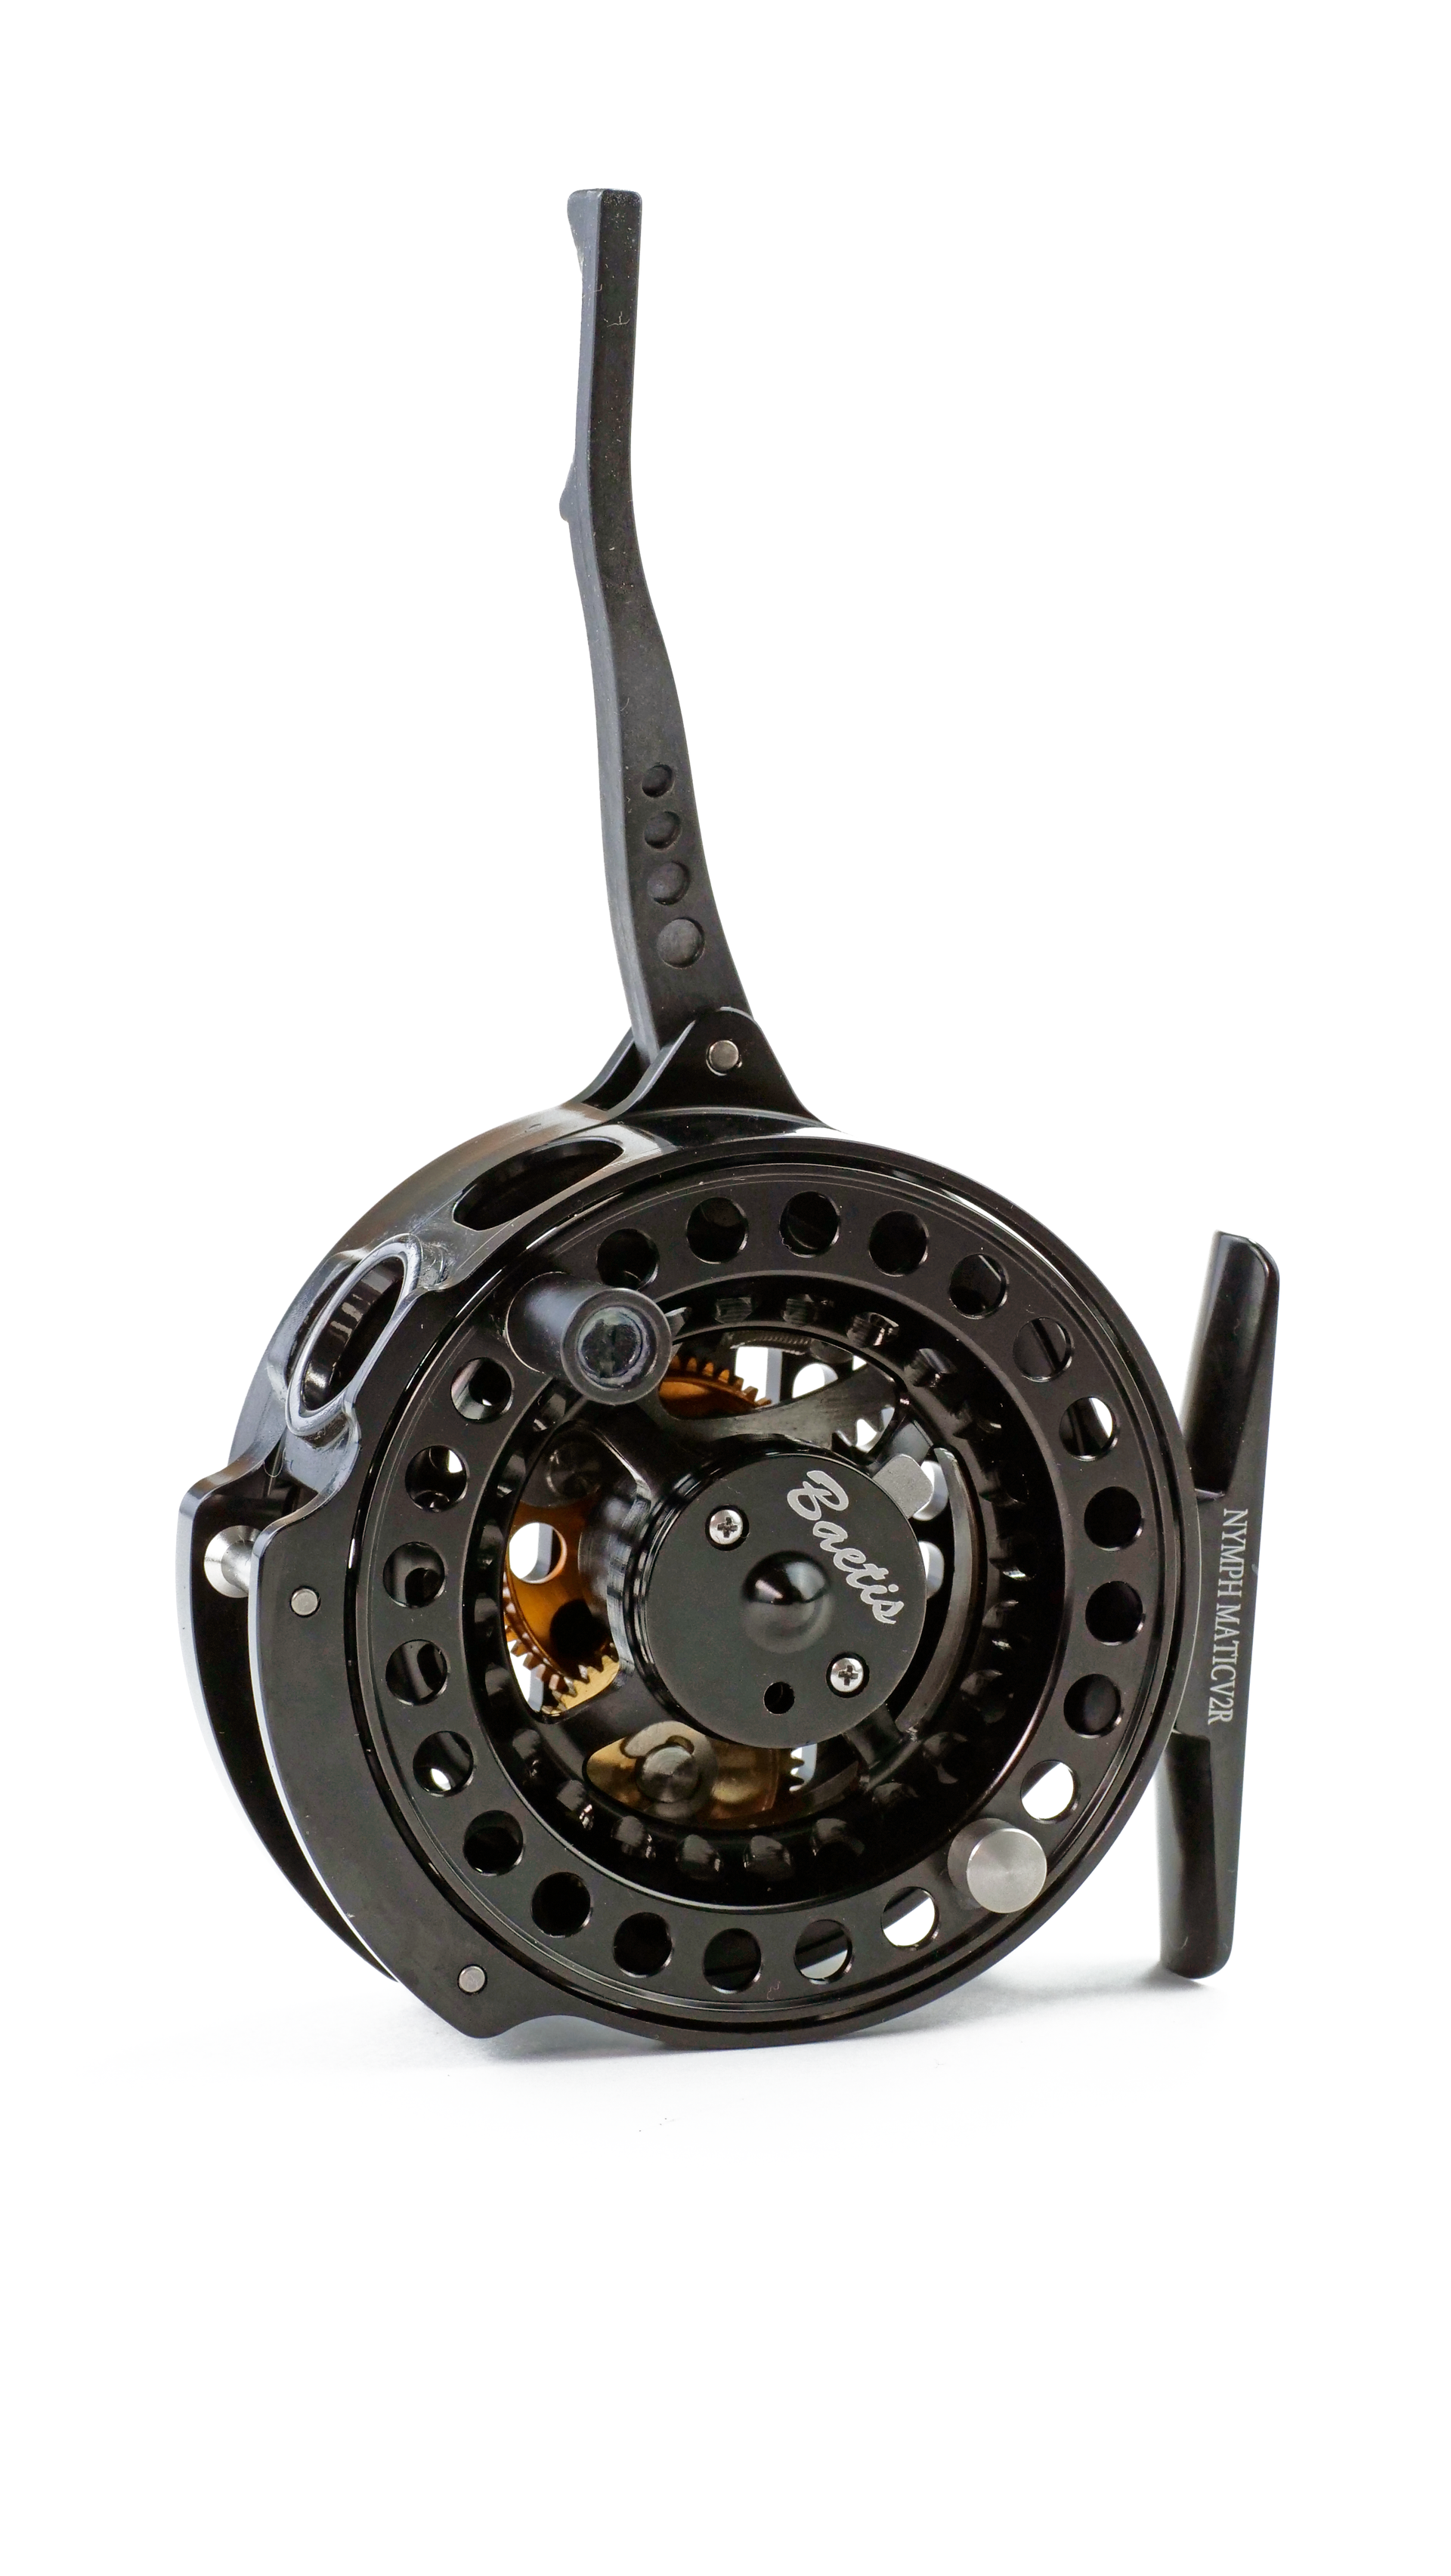 Aventik Automatic Fly Fishing Reel Super Light Nymph Fishing Reel European  Design Graphite Fly Reel with Extro Spool Mesh Bag